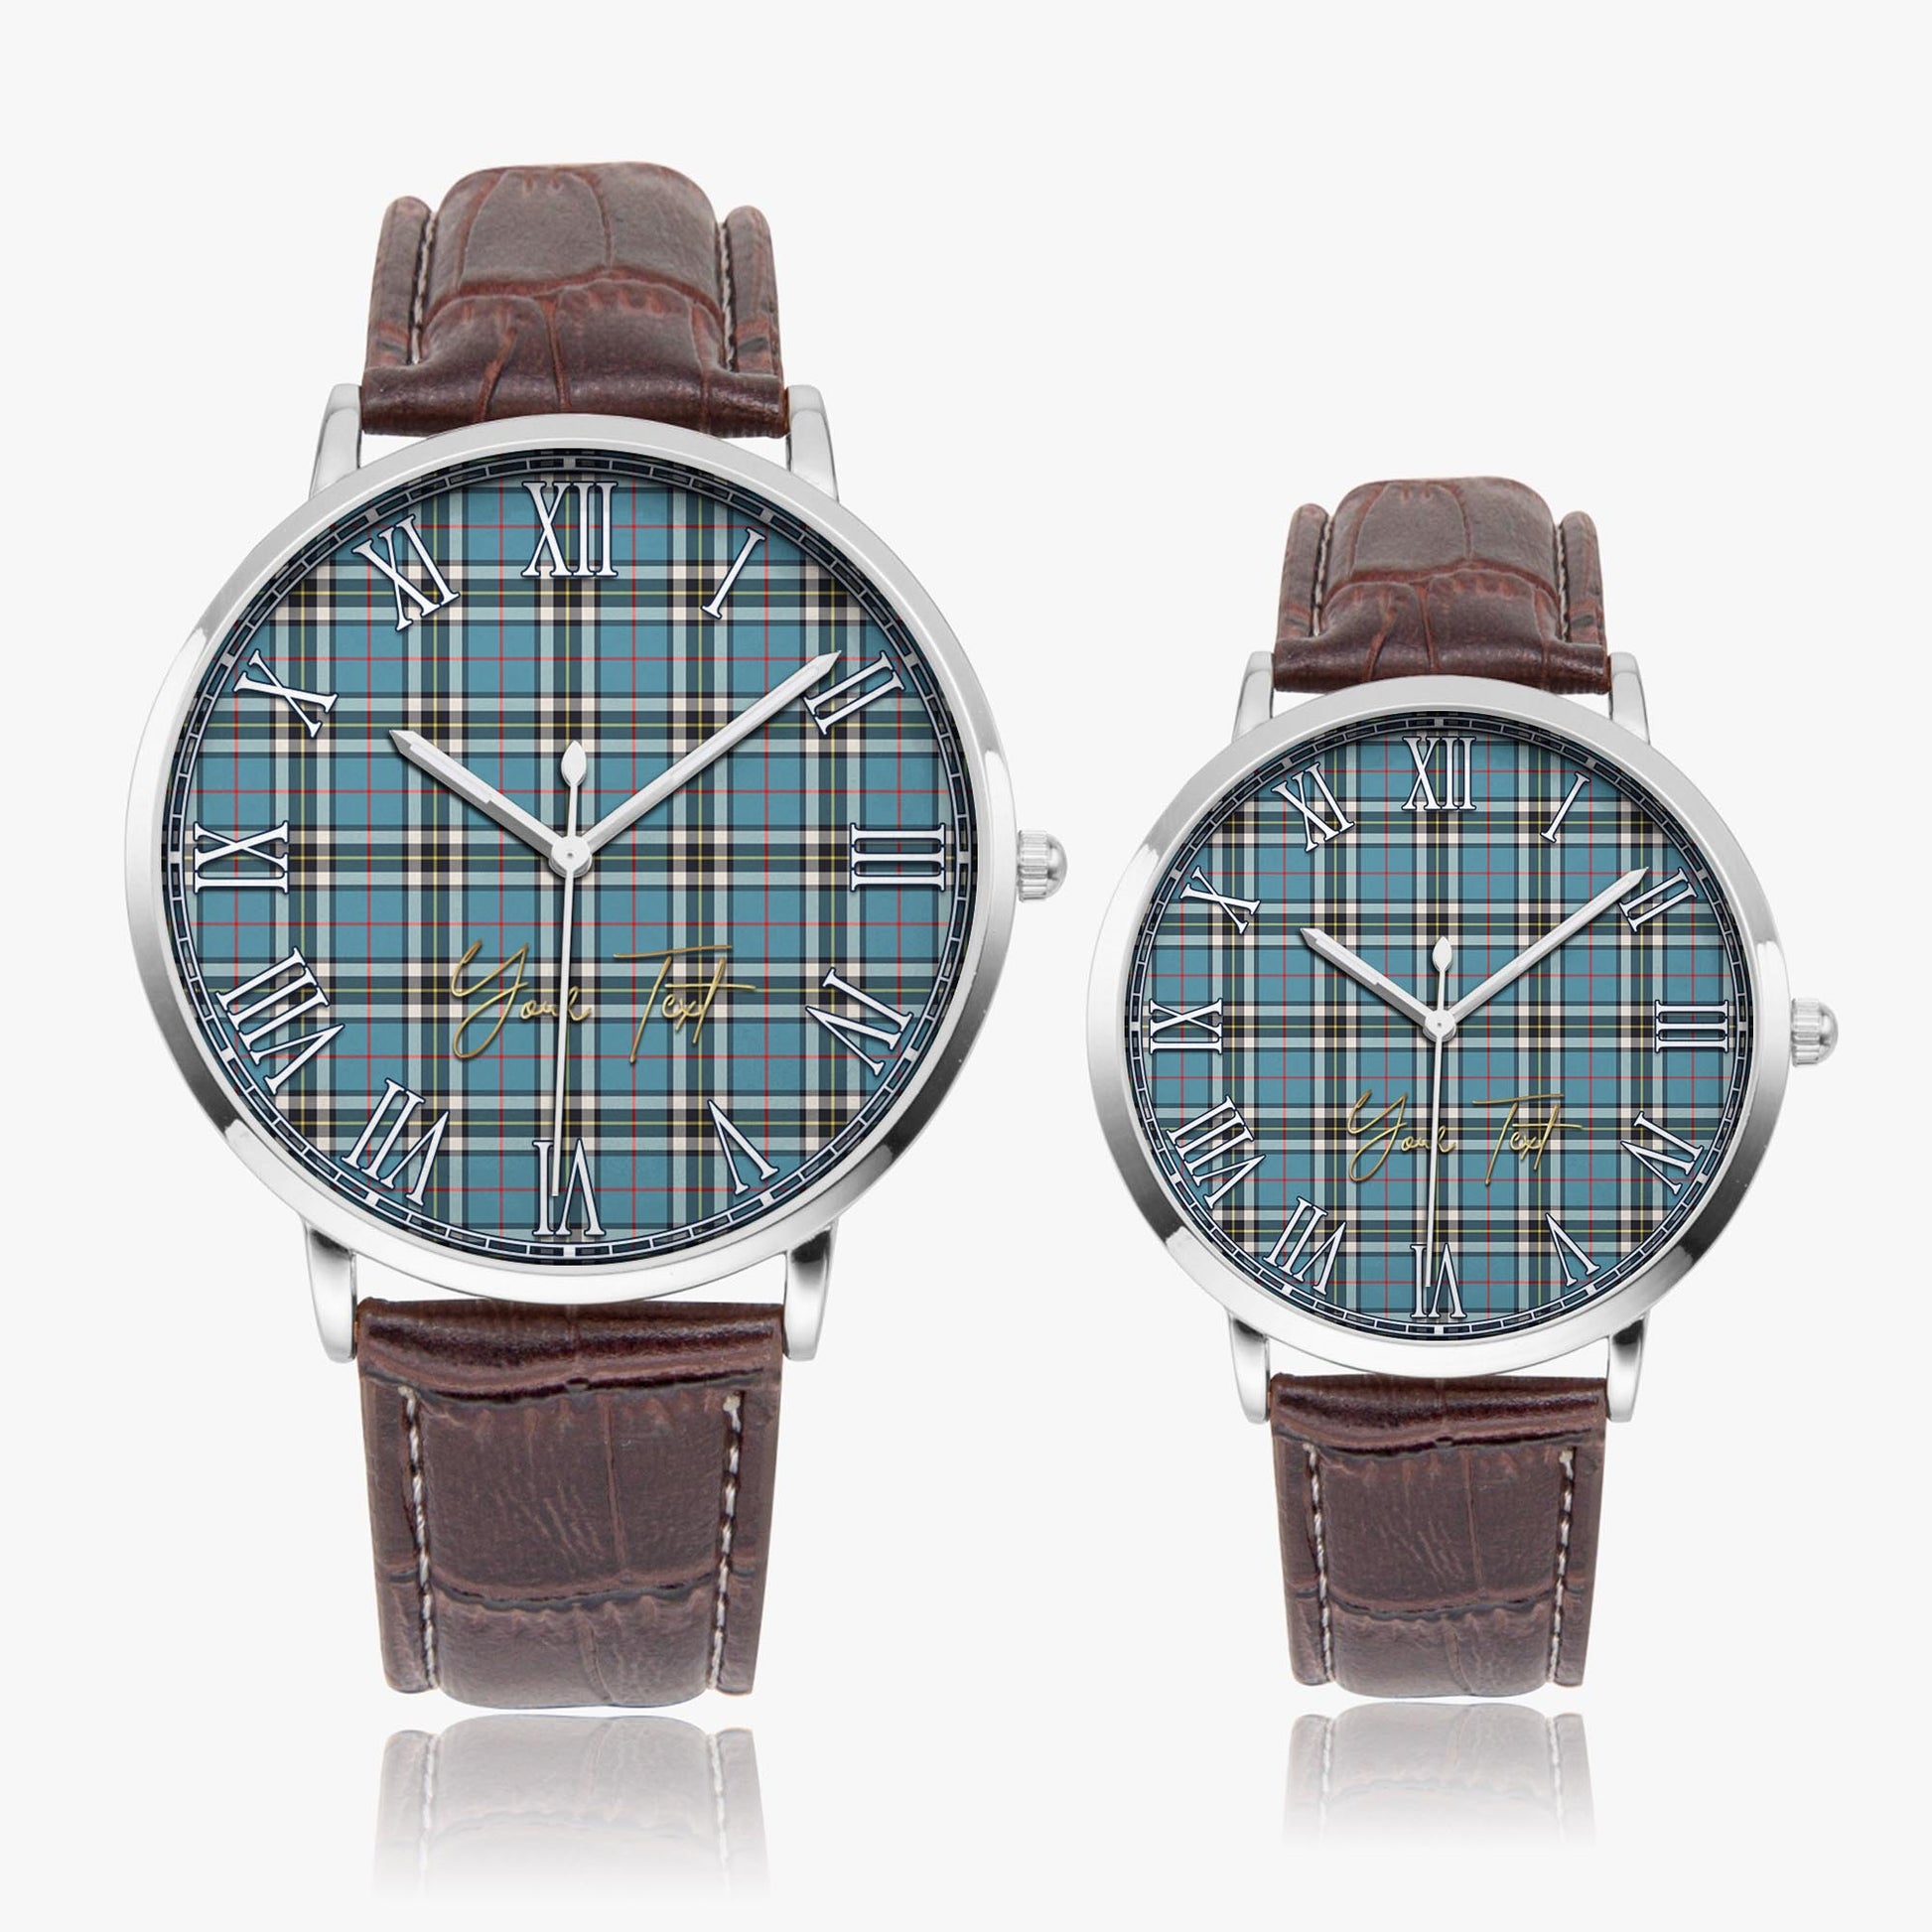 Thomson Tartan Personalized Your Text Leather Trap Quartz Watch Ultra Thin Silver Case With Brown Leather Strap - Tartanvibesclothing Shop